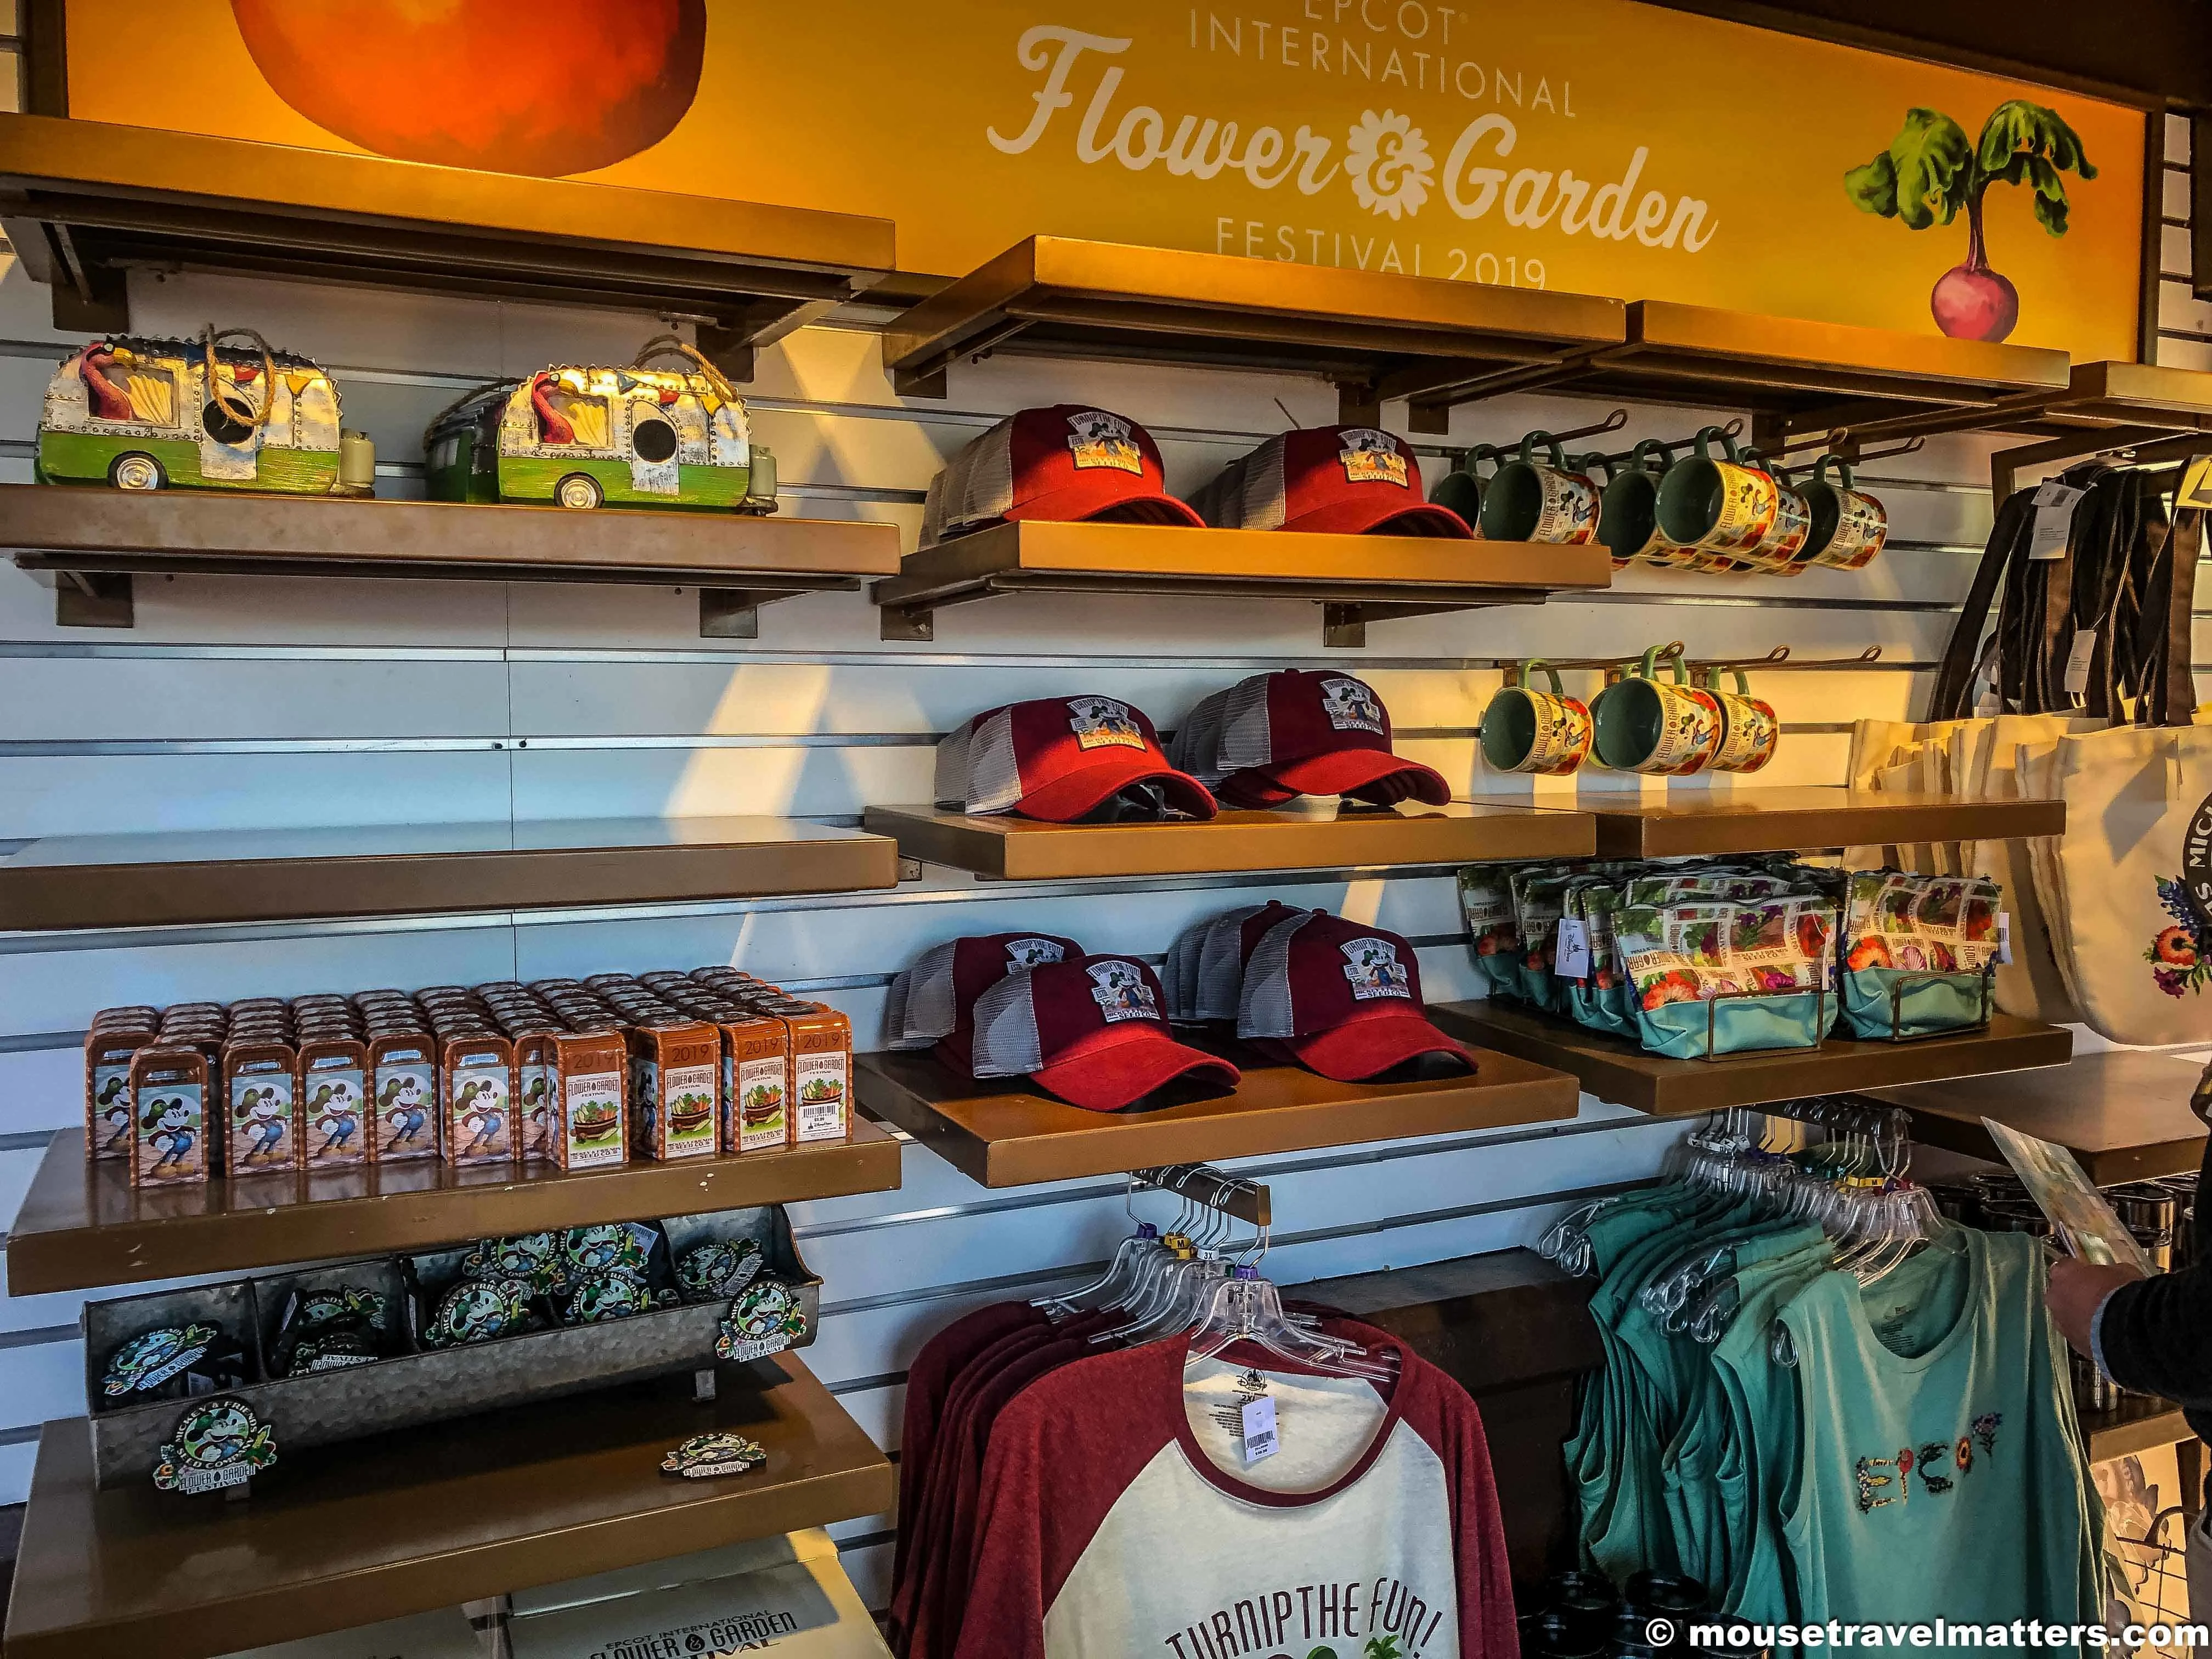 Shopping Tips for Disney World, including the best places to shop at Walt Disney World, when to shop and how to make the most of your shopping experience.